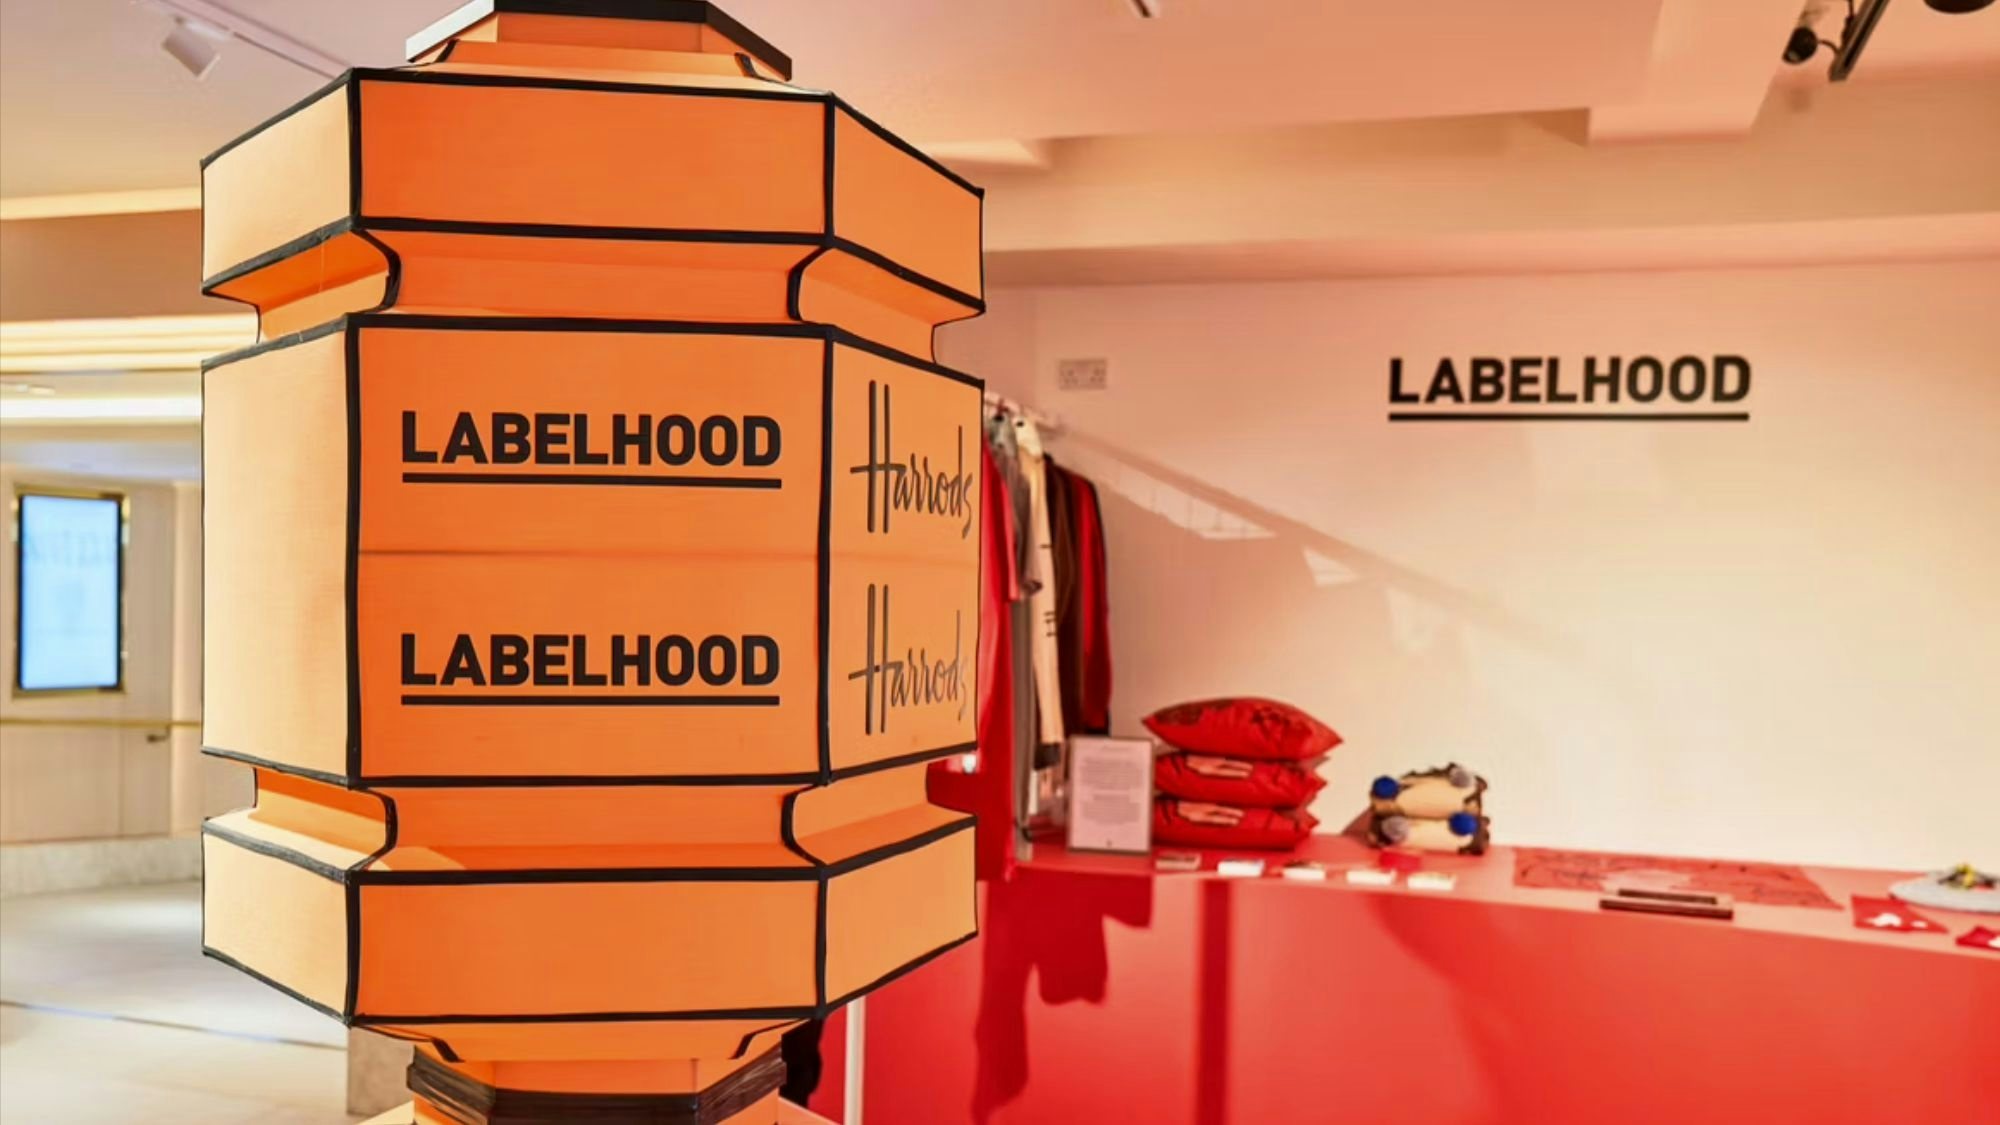 For Spring Festival, Harrods hosted a Labelhood pop-up, presenting independent Chinese designers. Photo: Harrods